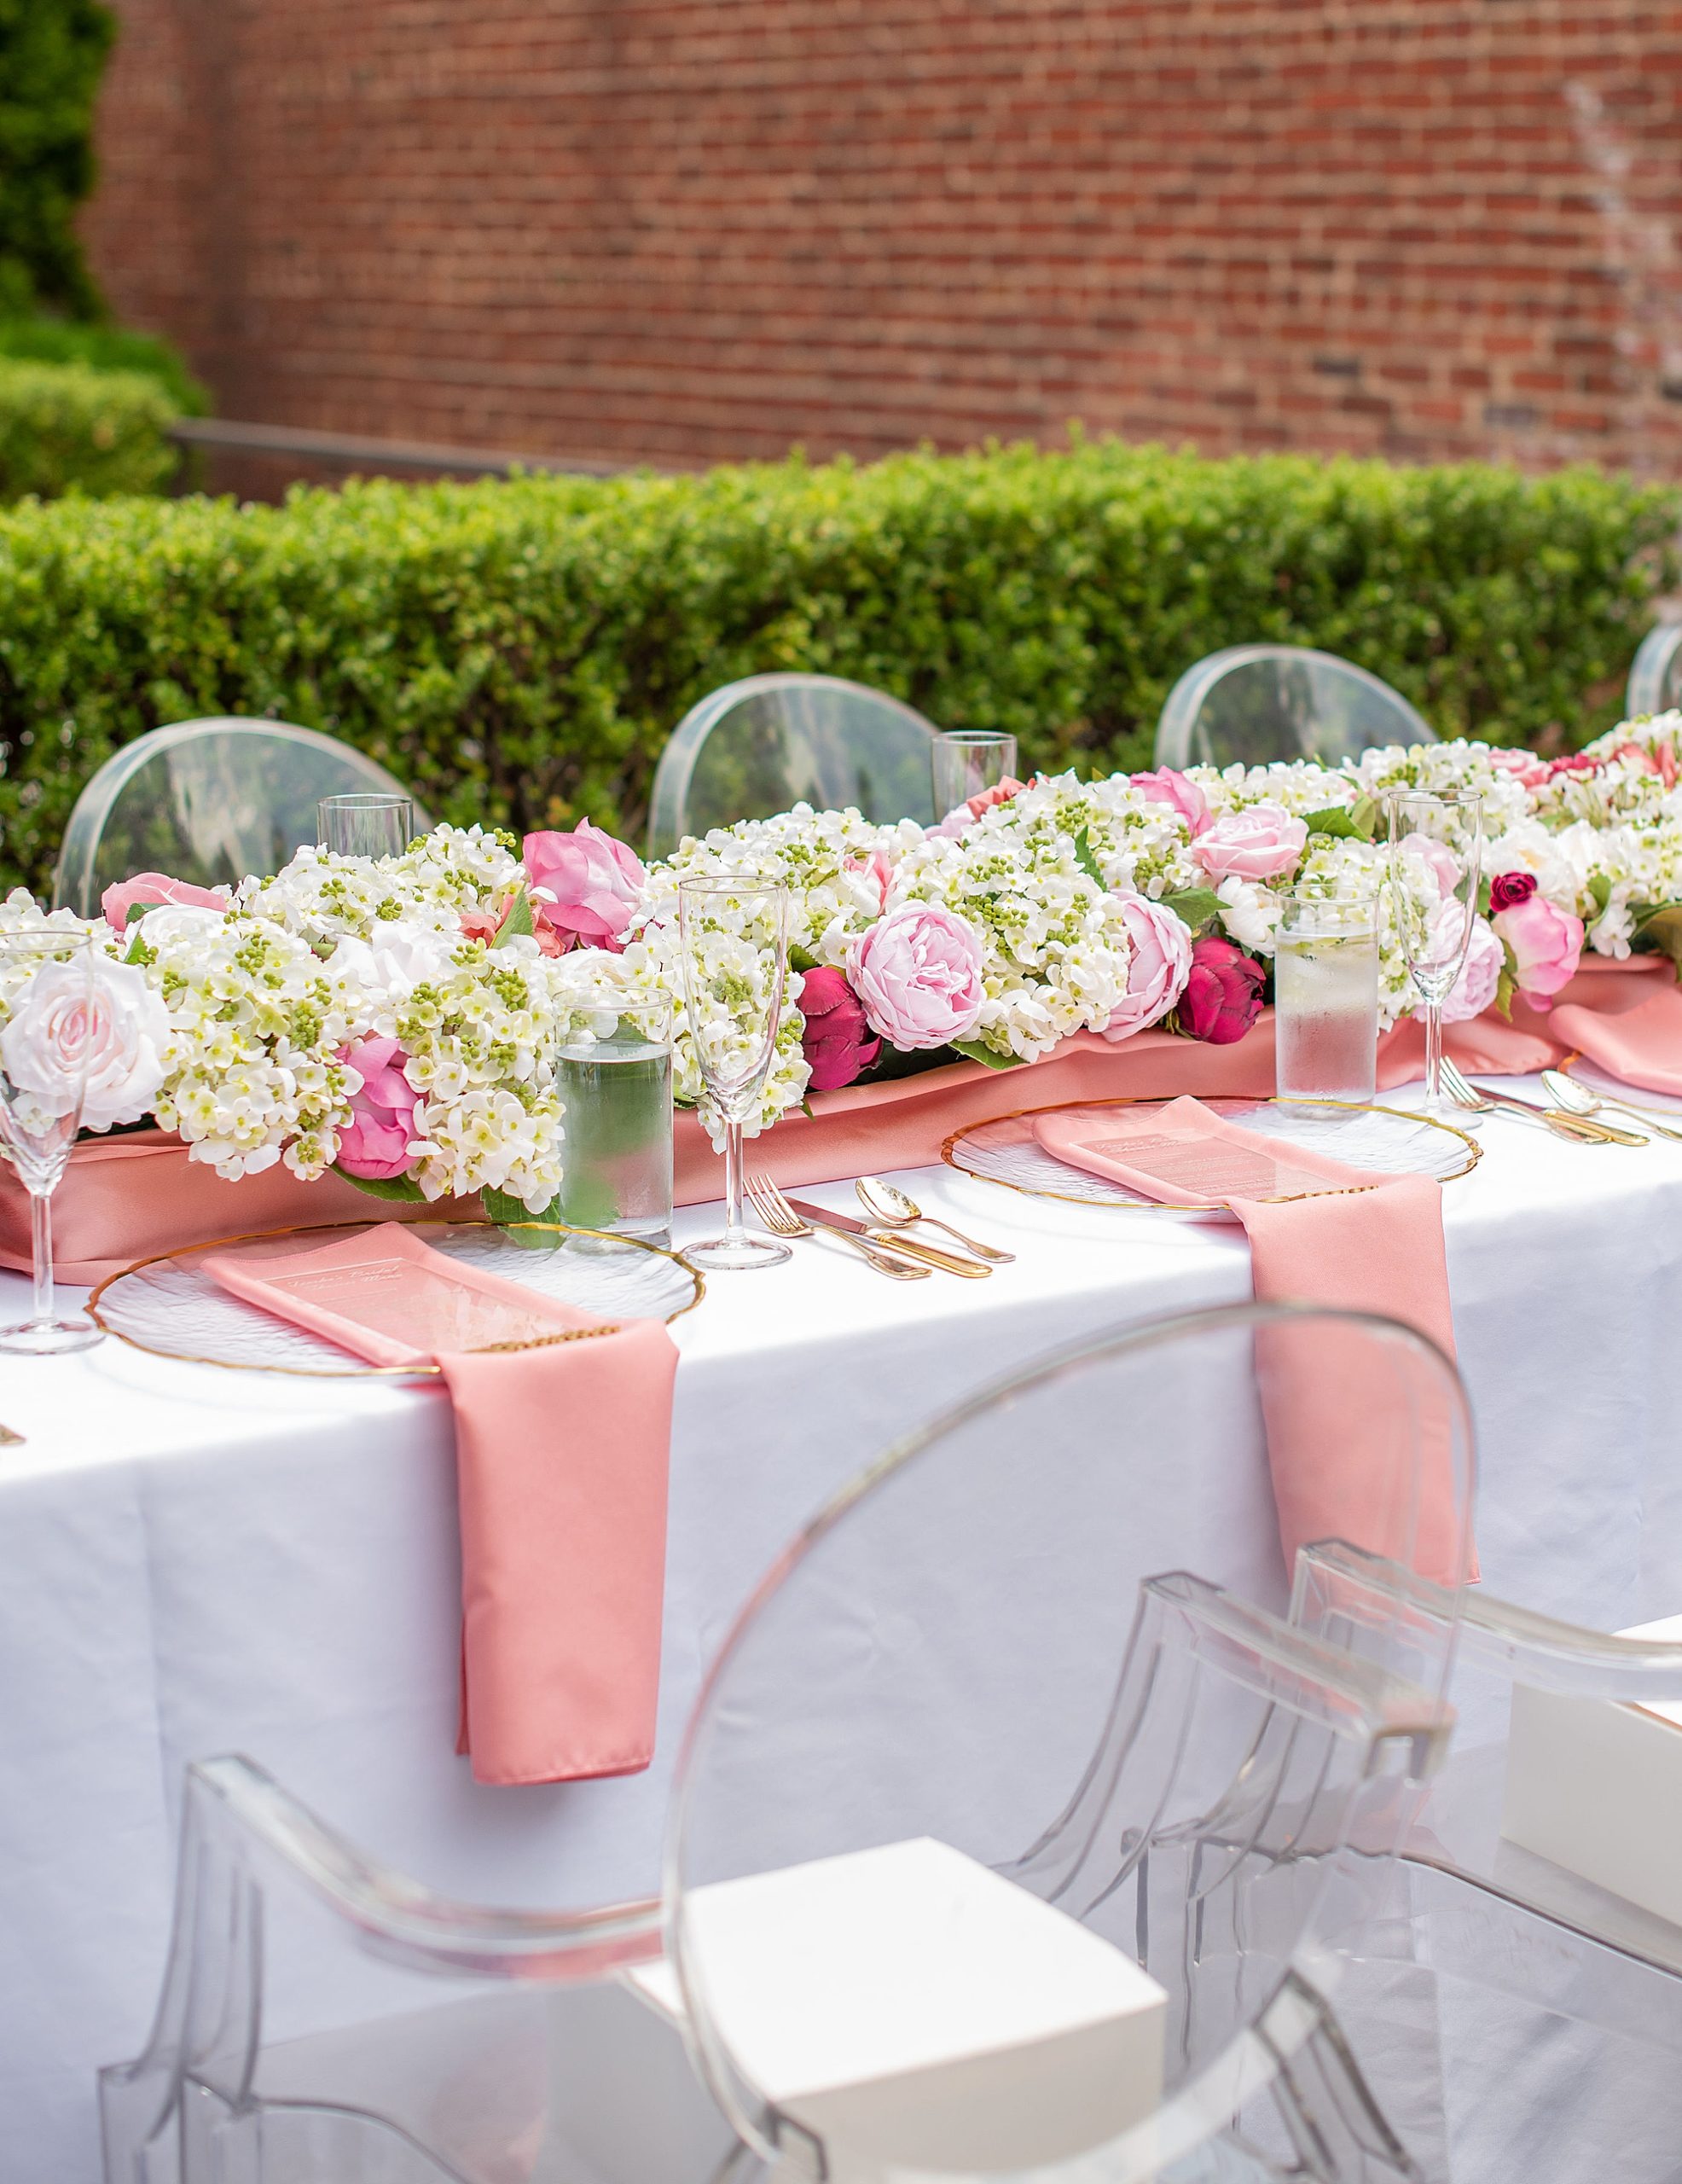 Fathom Gallery bridal shower with pink and white details